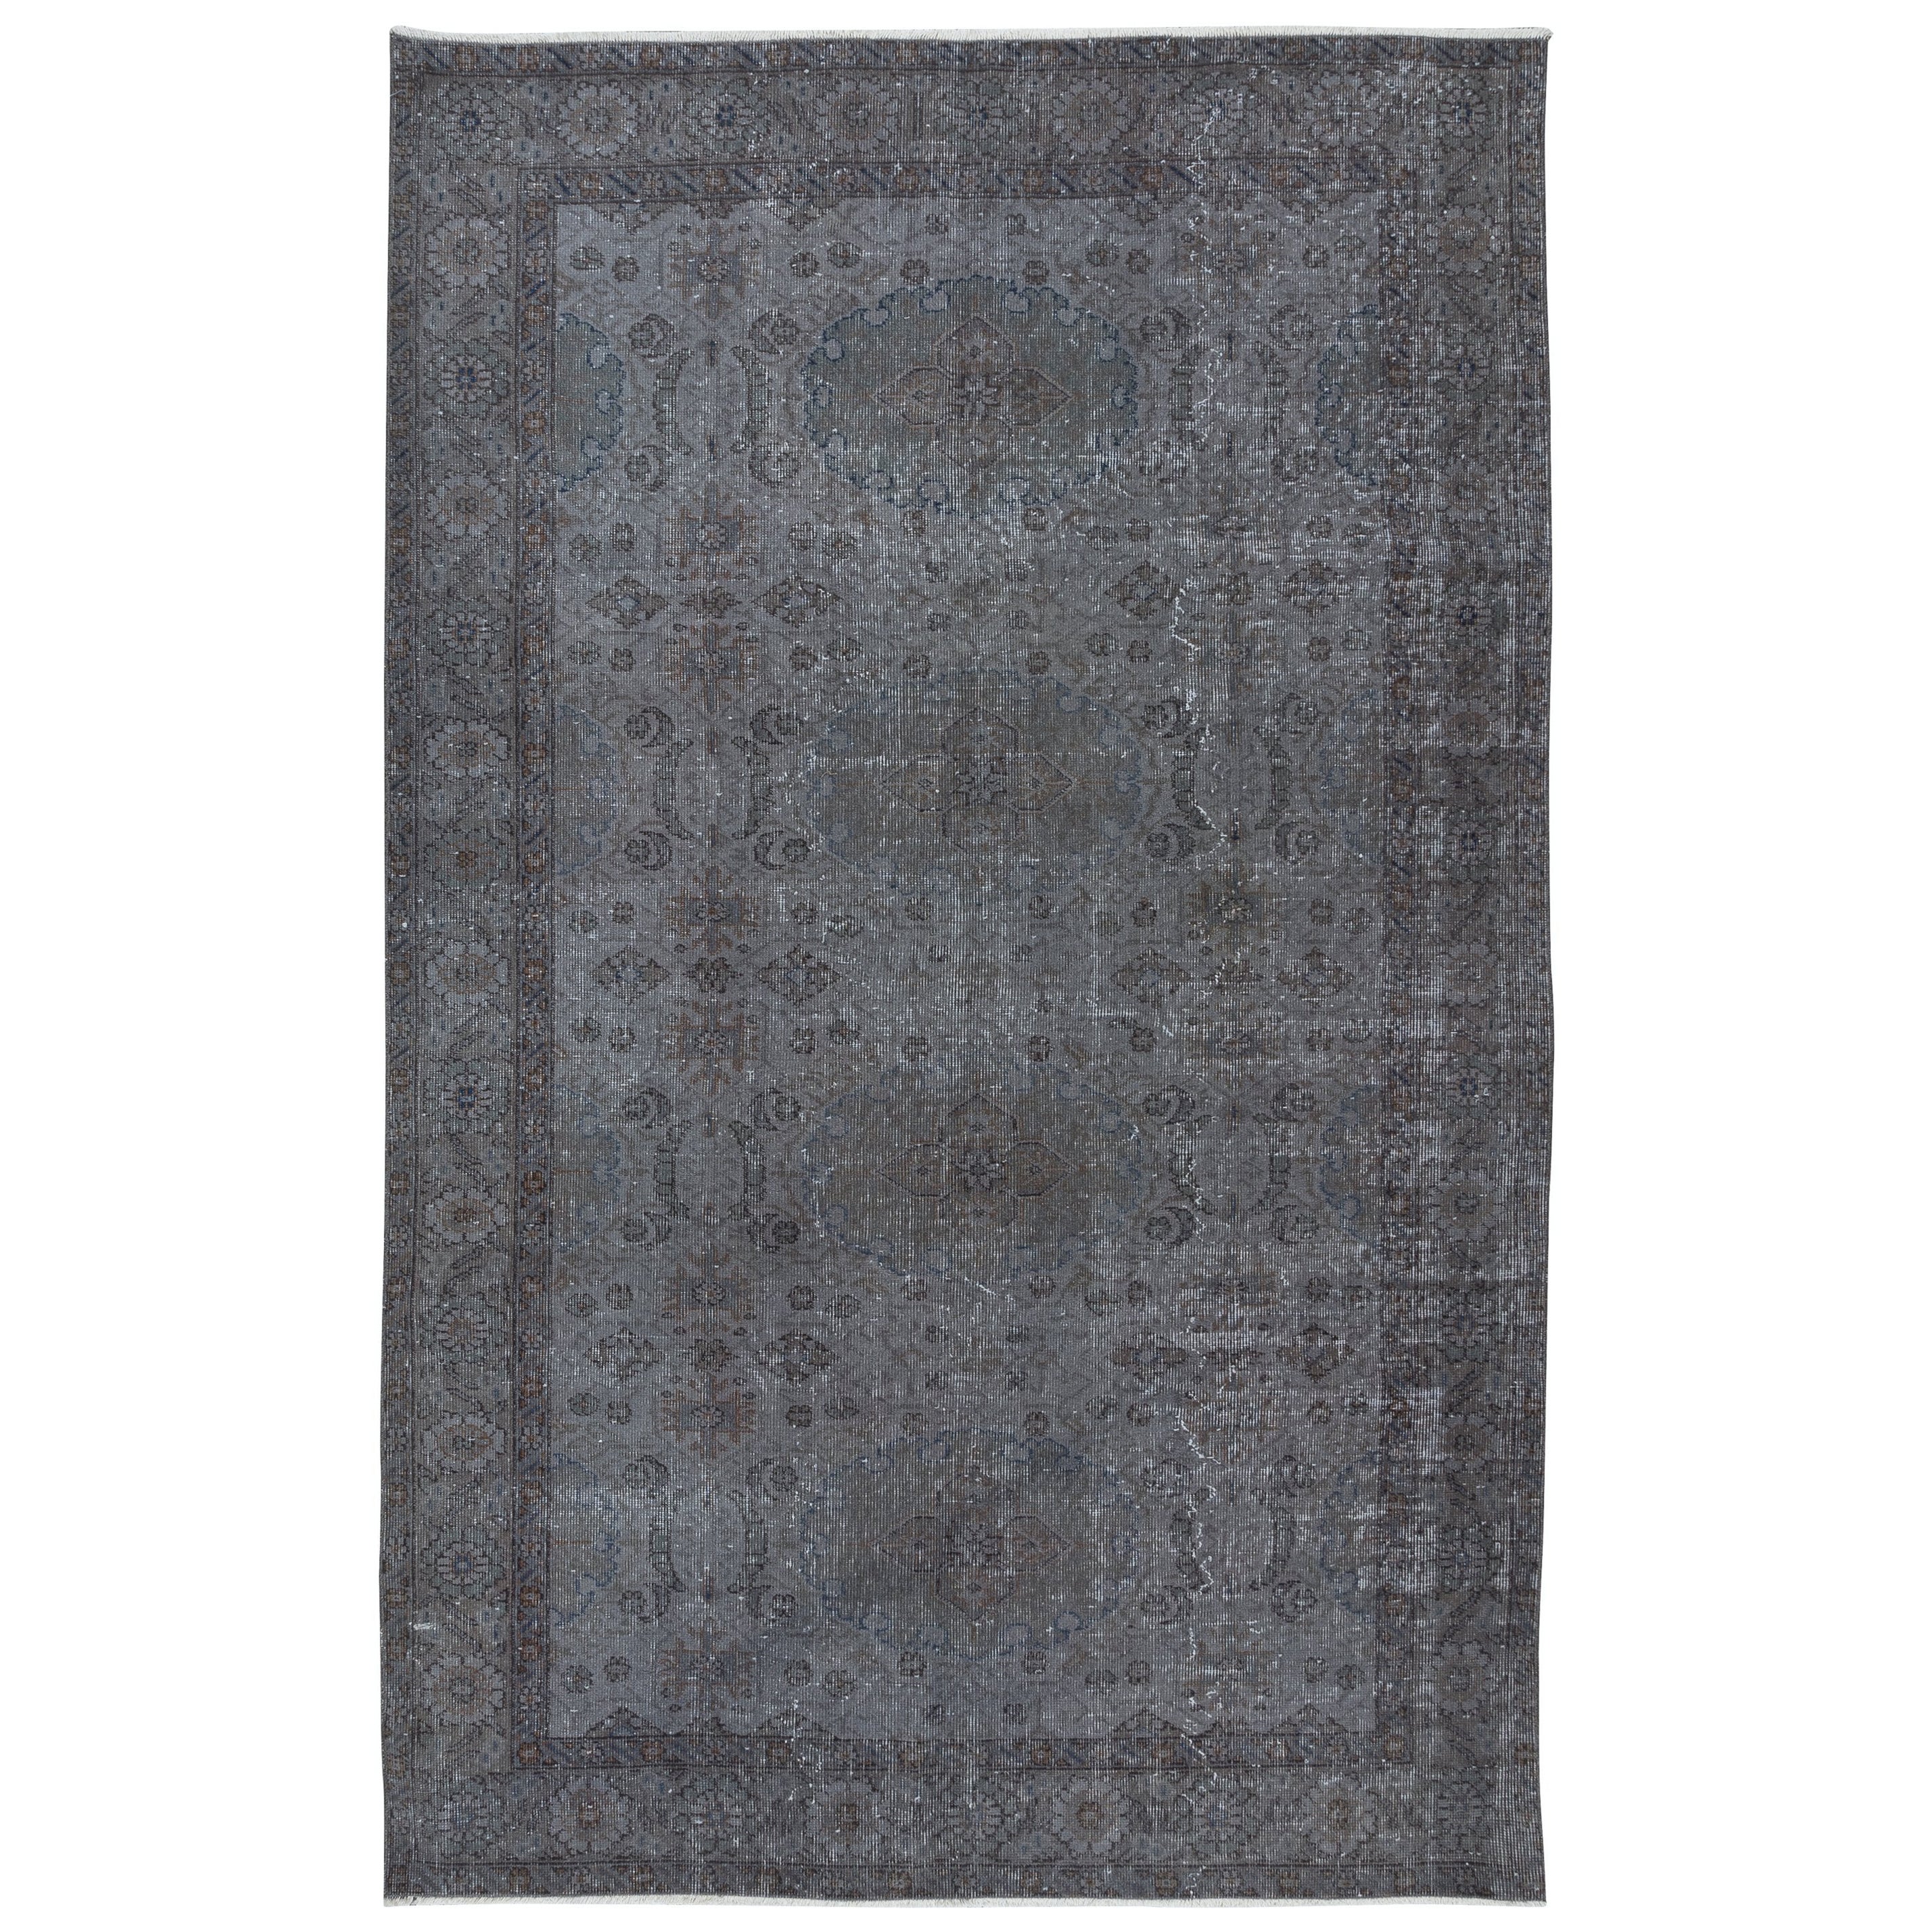 5.6x8.7 Ft Traditional Handmade Rug in Iron Gray Color, Modern Home Decor Carpet For Sale